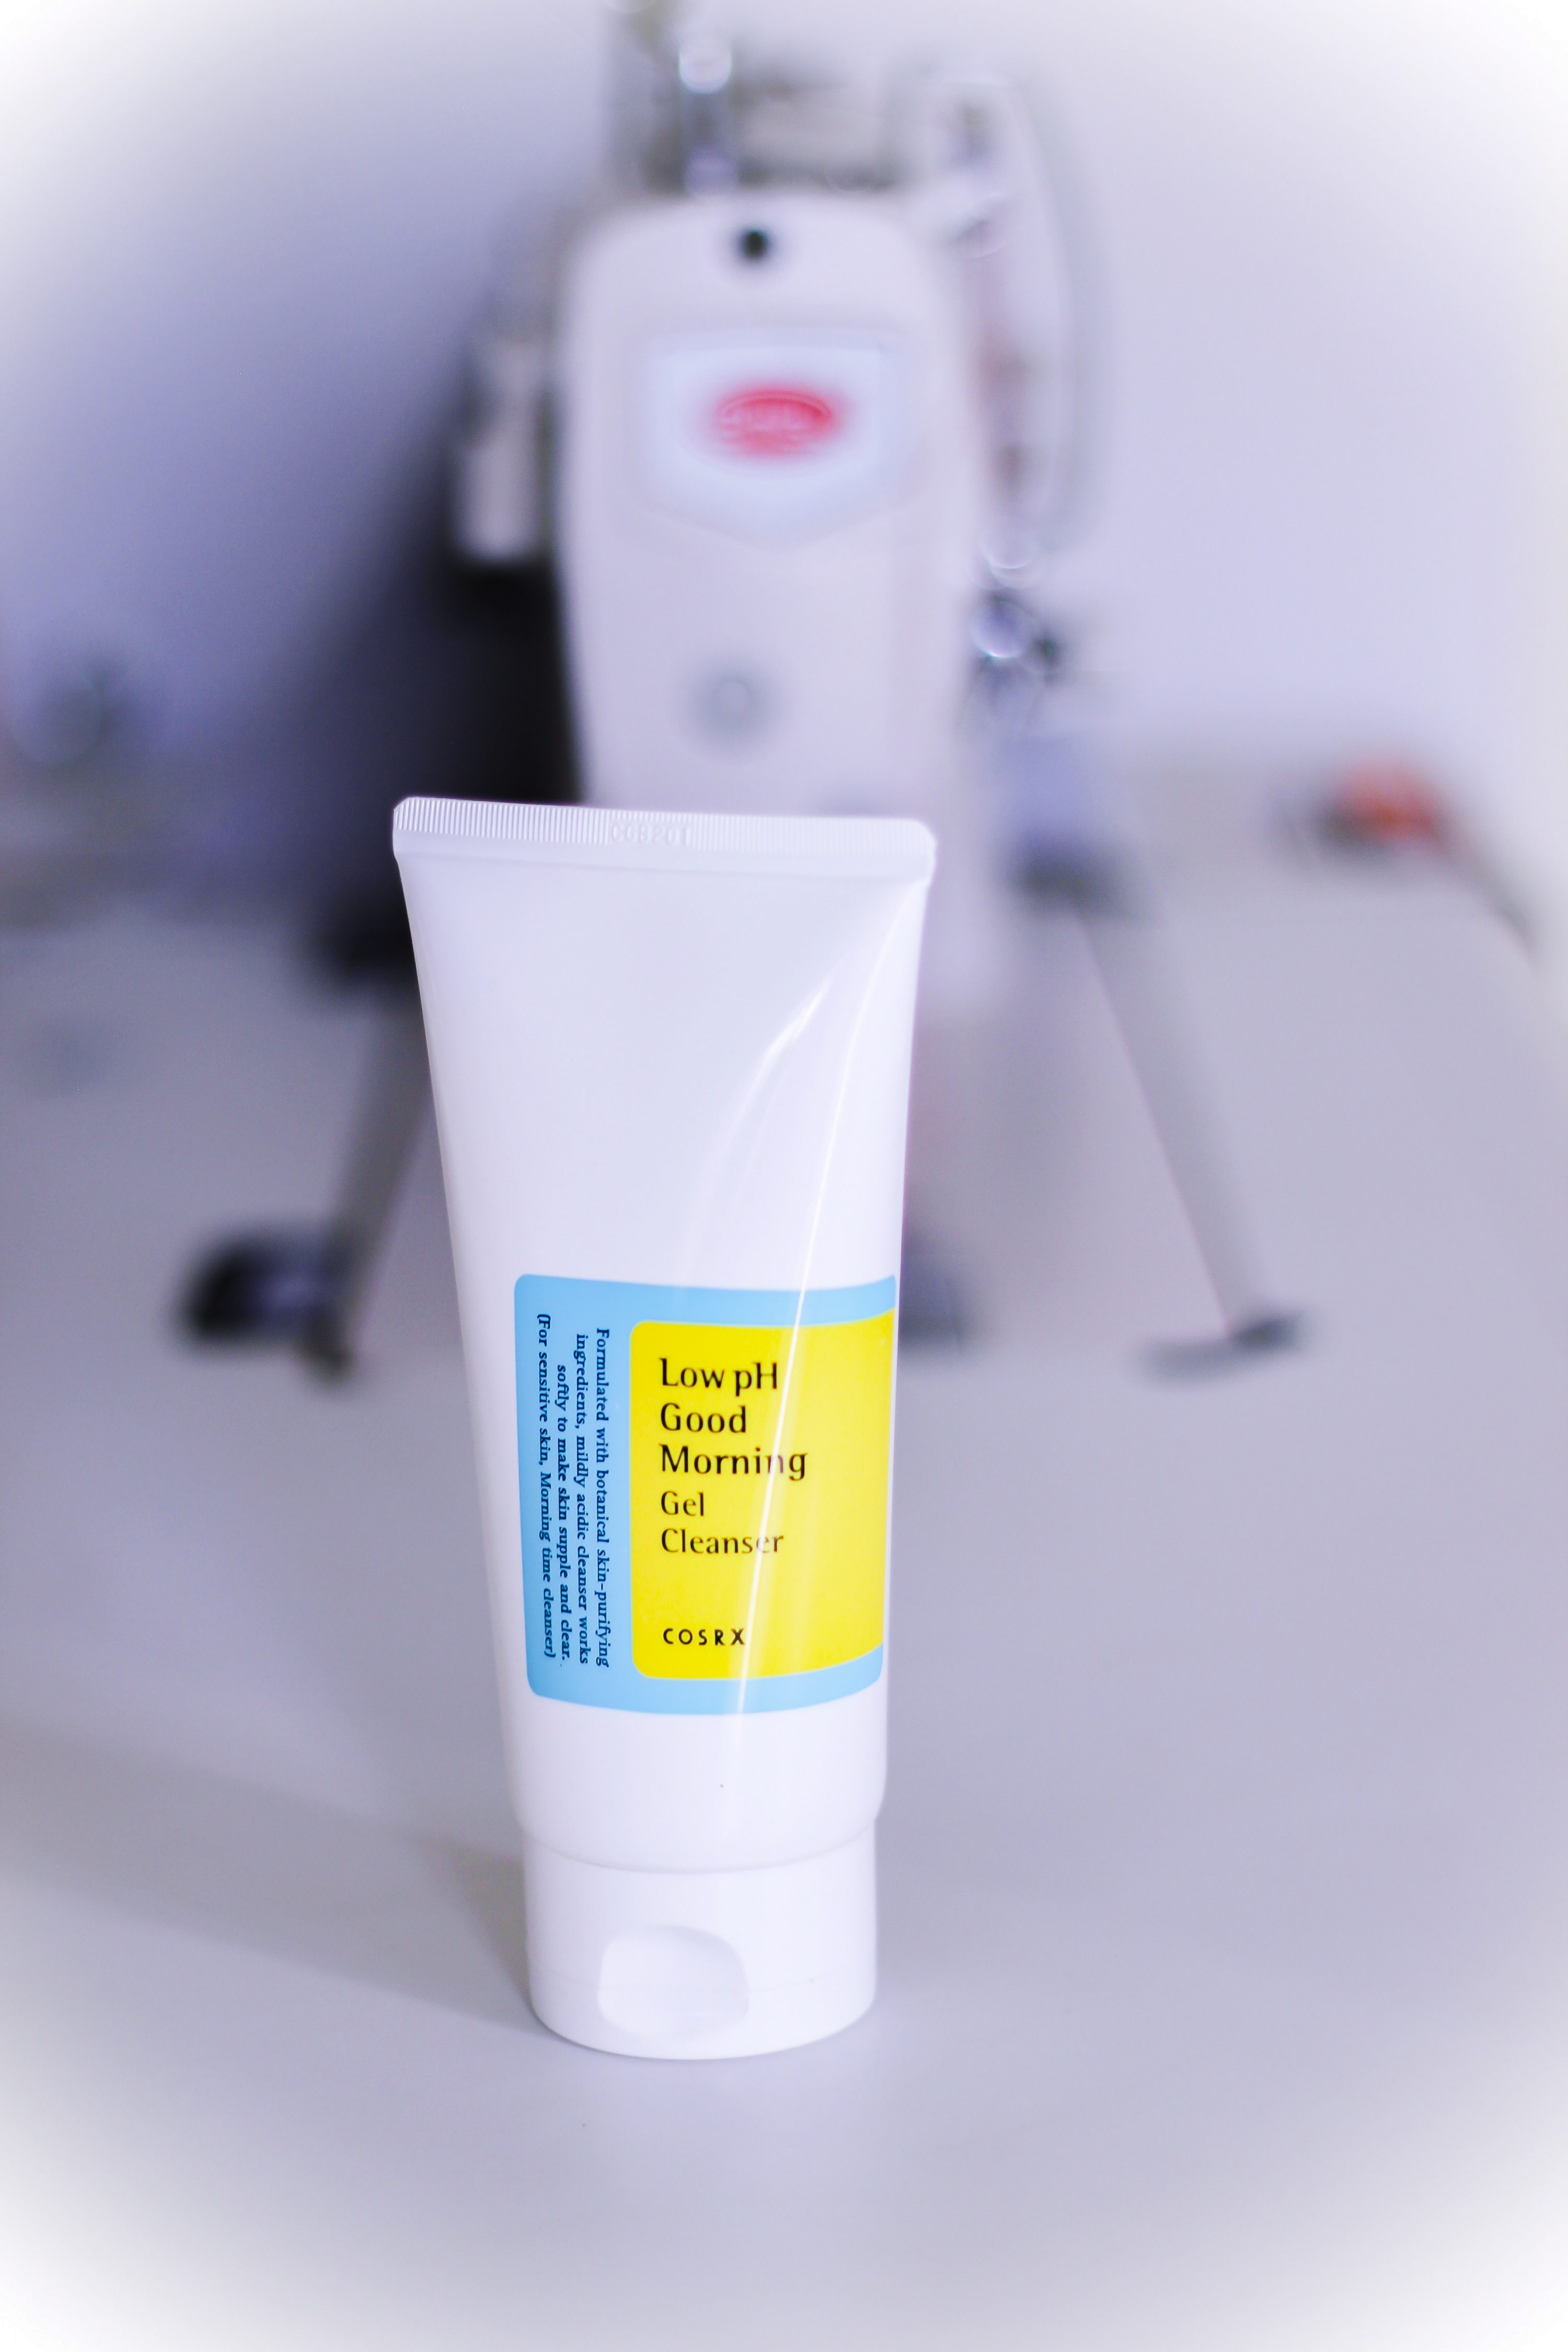 cosrx low ph Goodmorning gel cleanser review 